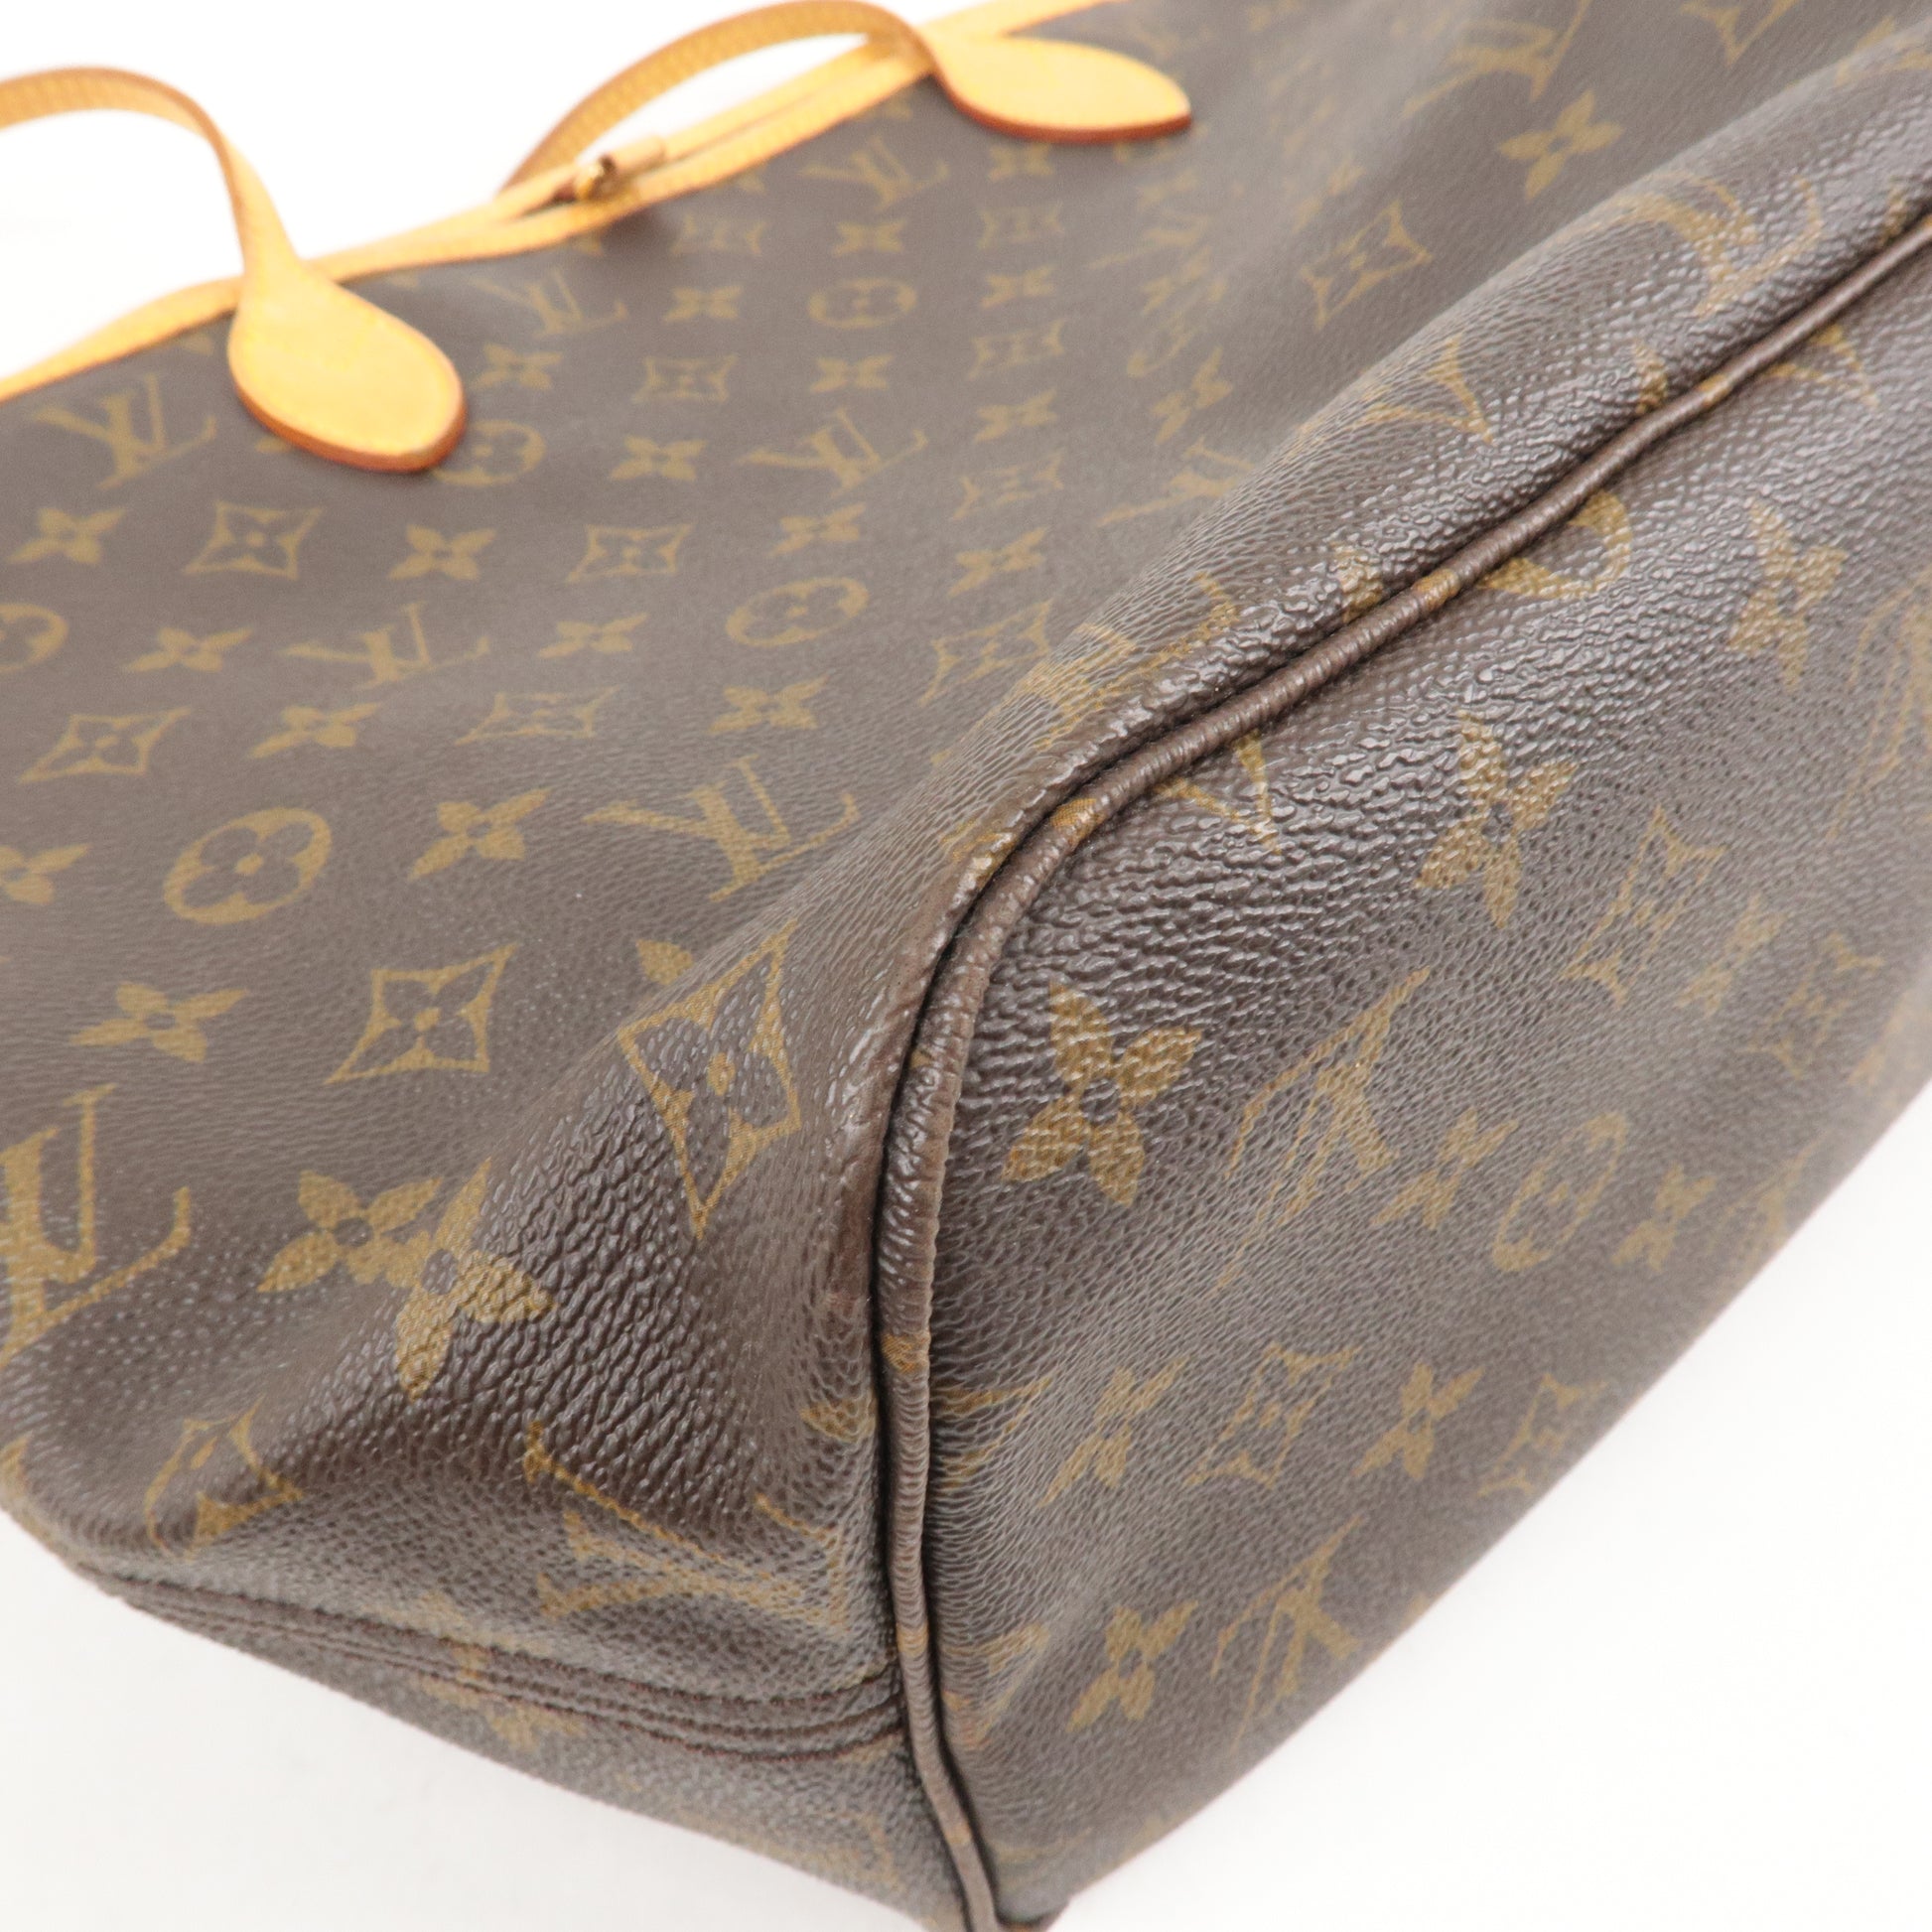 LOUIS VUITTON Monogram Neverfull MM Tote Bag M40156 LV Auth ny243